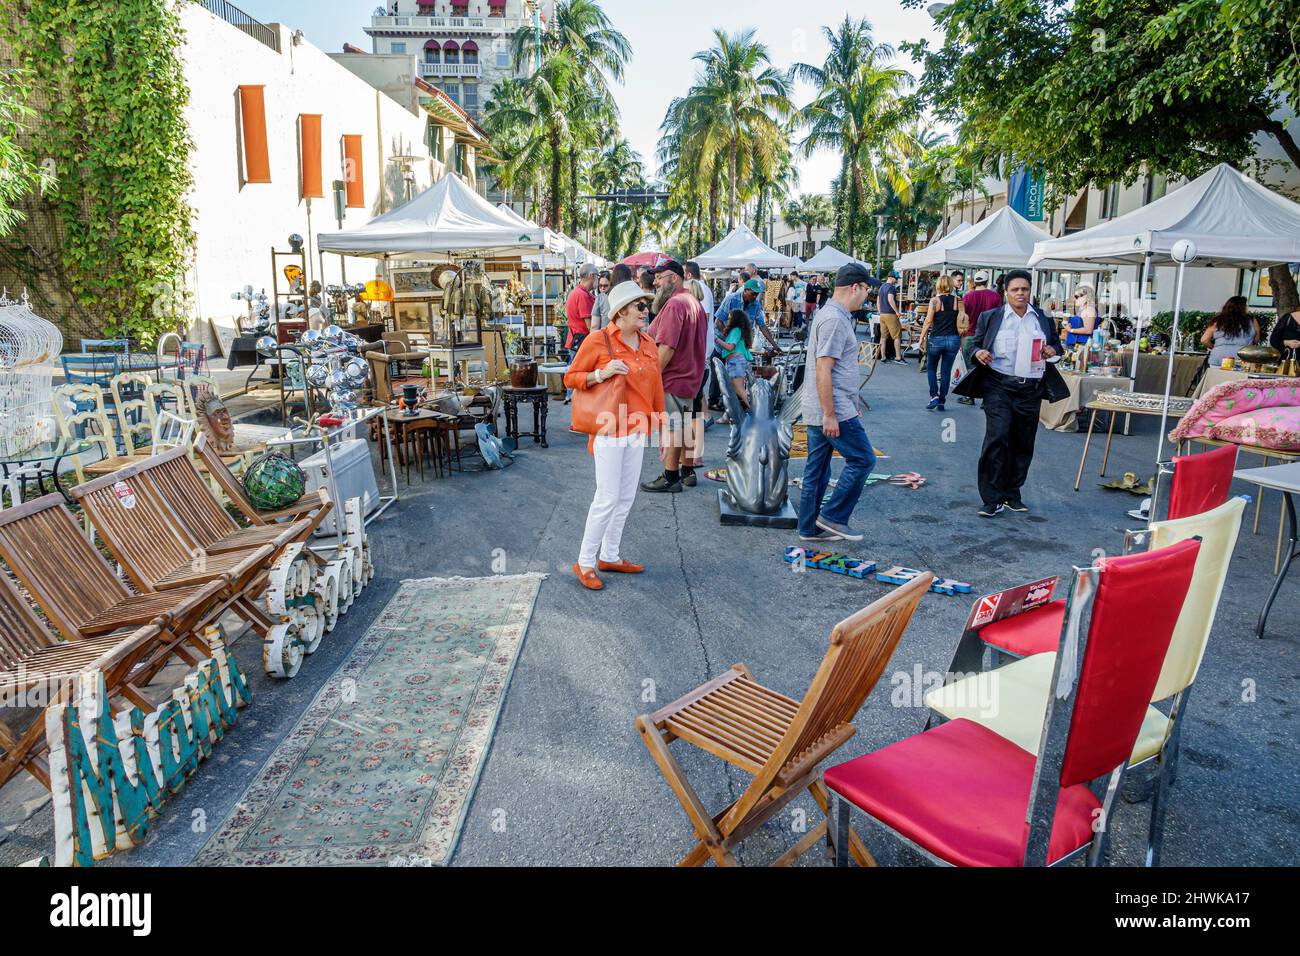 Miami Beach Florida,Lincoln Road,pedestrian mall arcade,shopping shoppers,antique collectible vendors market marketplace furniture chairs display sale Stock Photo